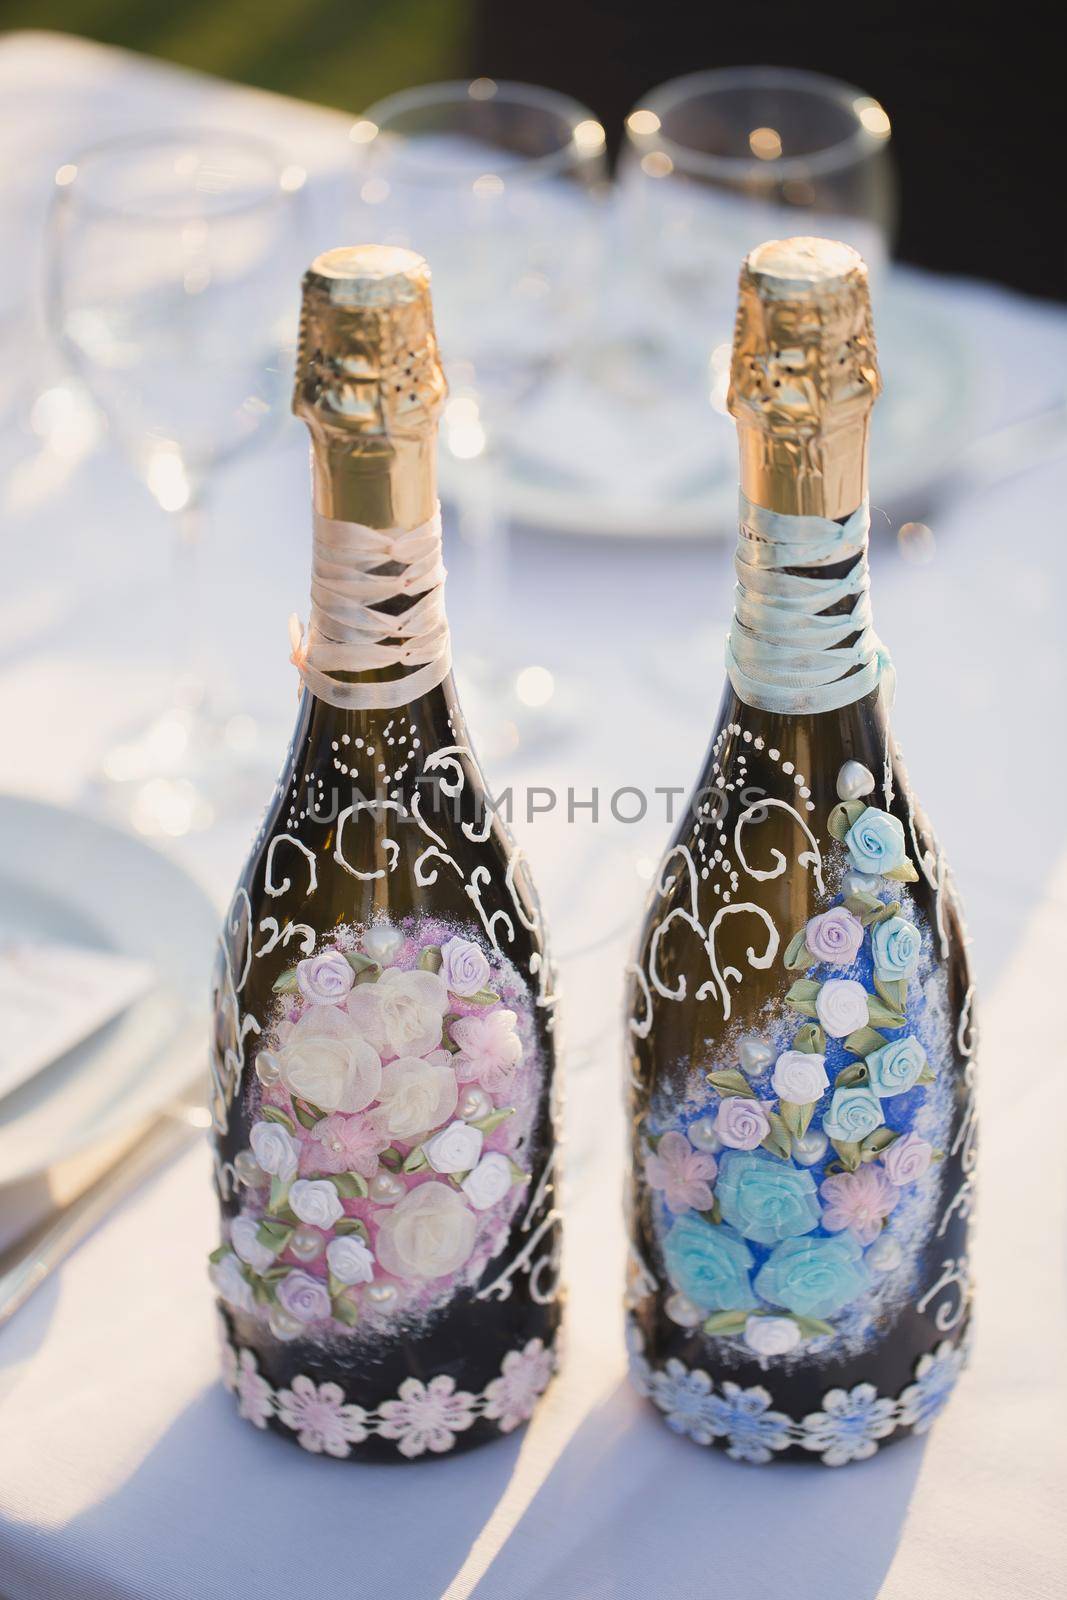 Decoration of a bottle of champagne and sparkling wine on table. Wedding decor by StudioPeace